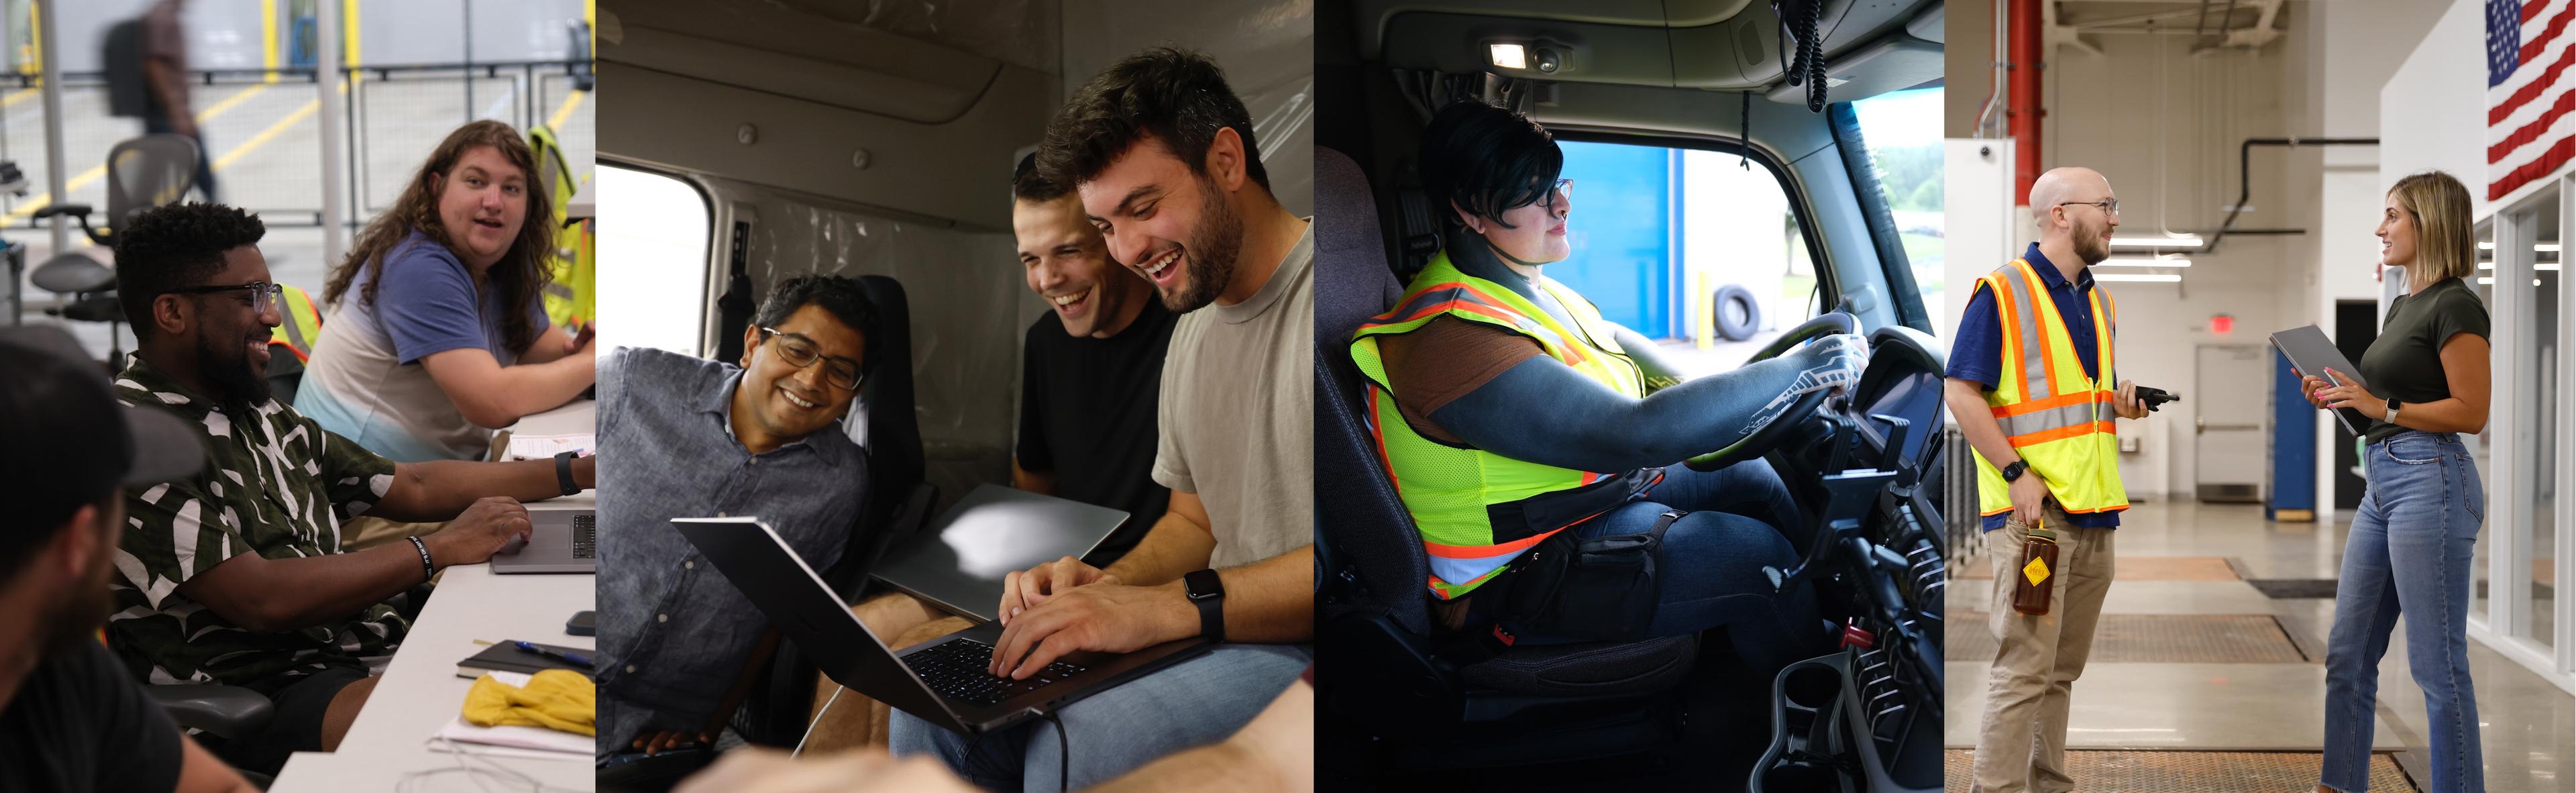 Collage of diverse Stack AV employees enjoying working together on trucks and in the office